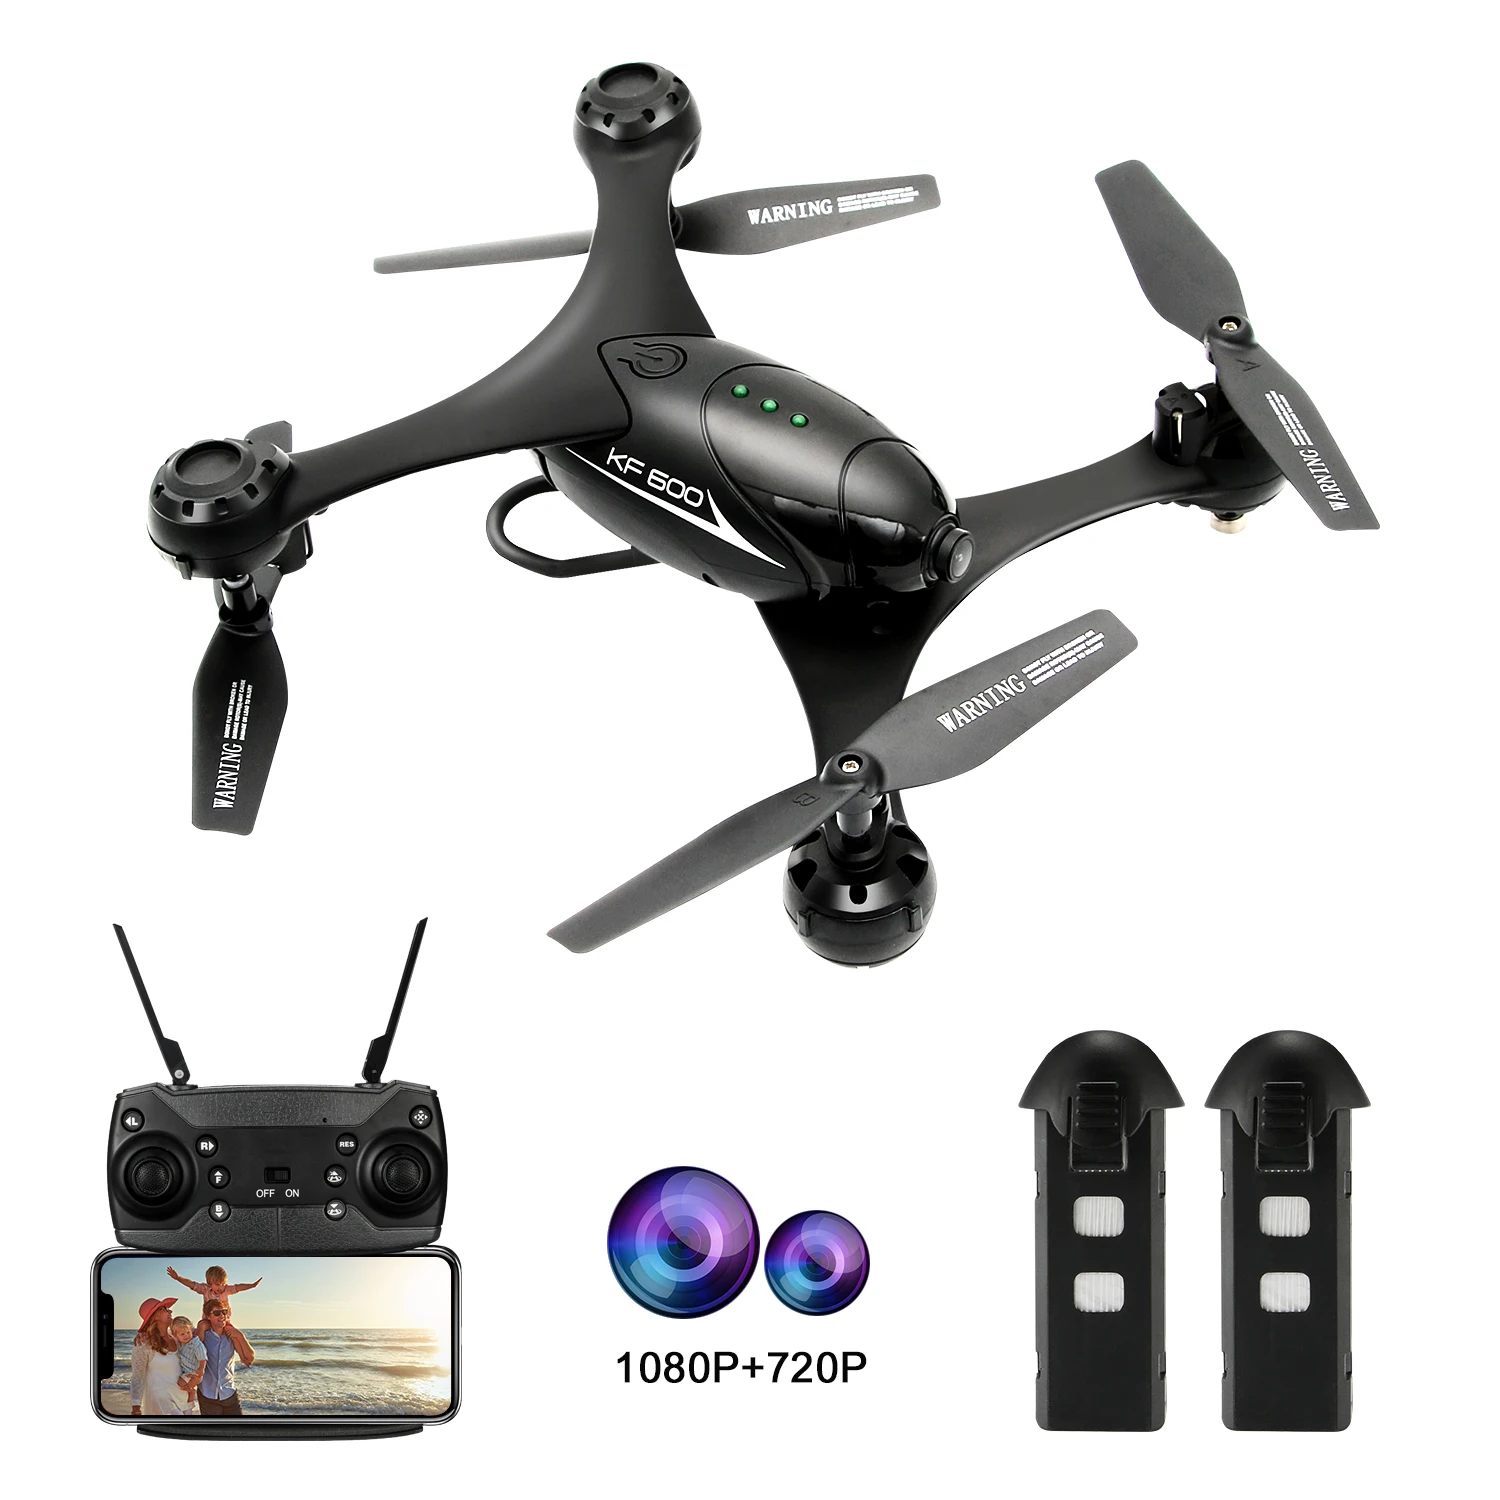 

2020 Hot KF600 drone 1080P WIFI Camera Drone FPV gravity gesture photo Christmas gift Toys App control toys drone, Black